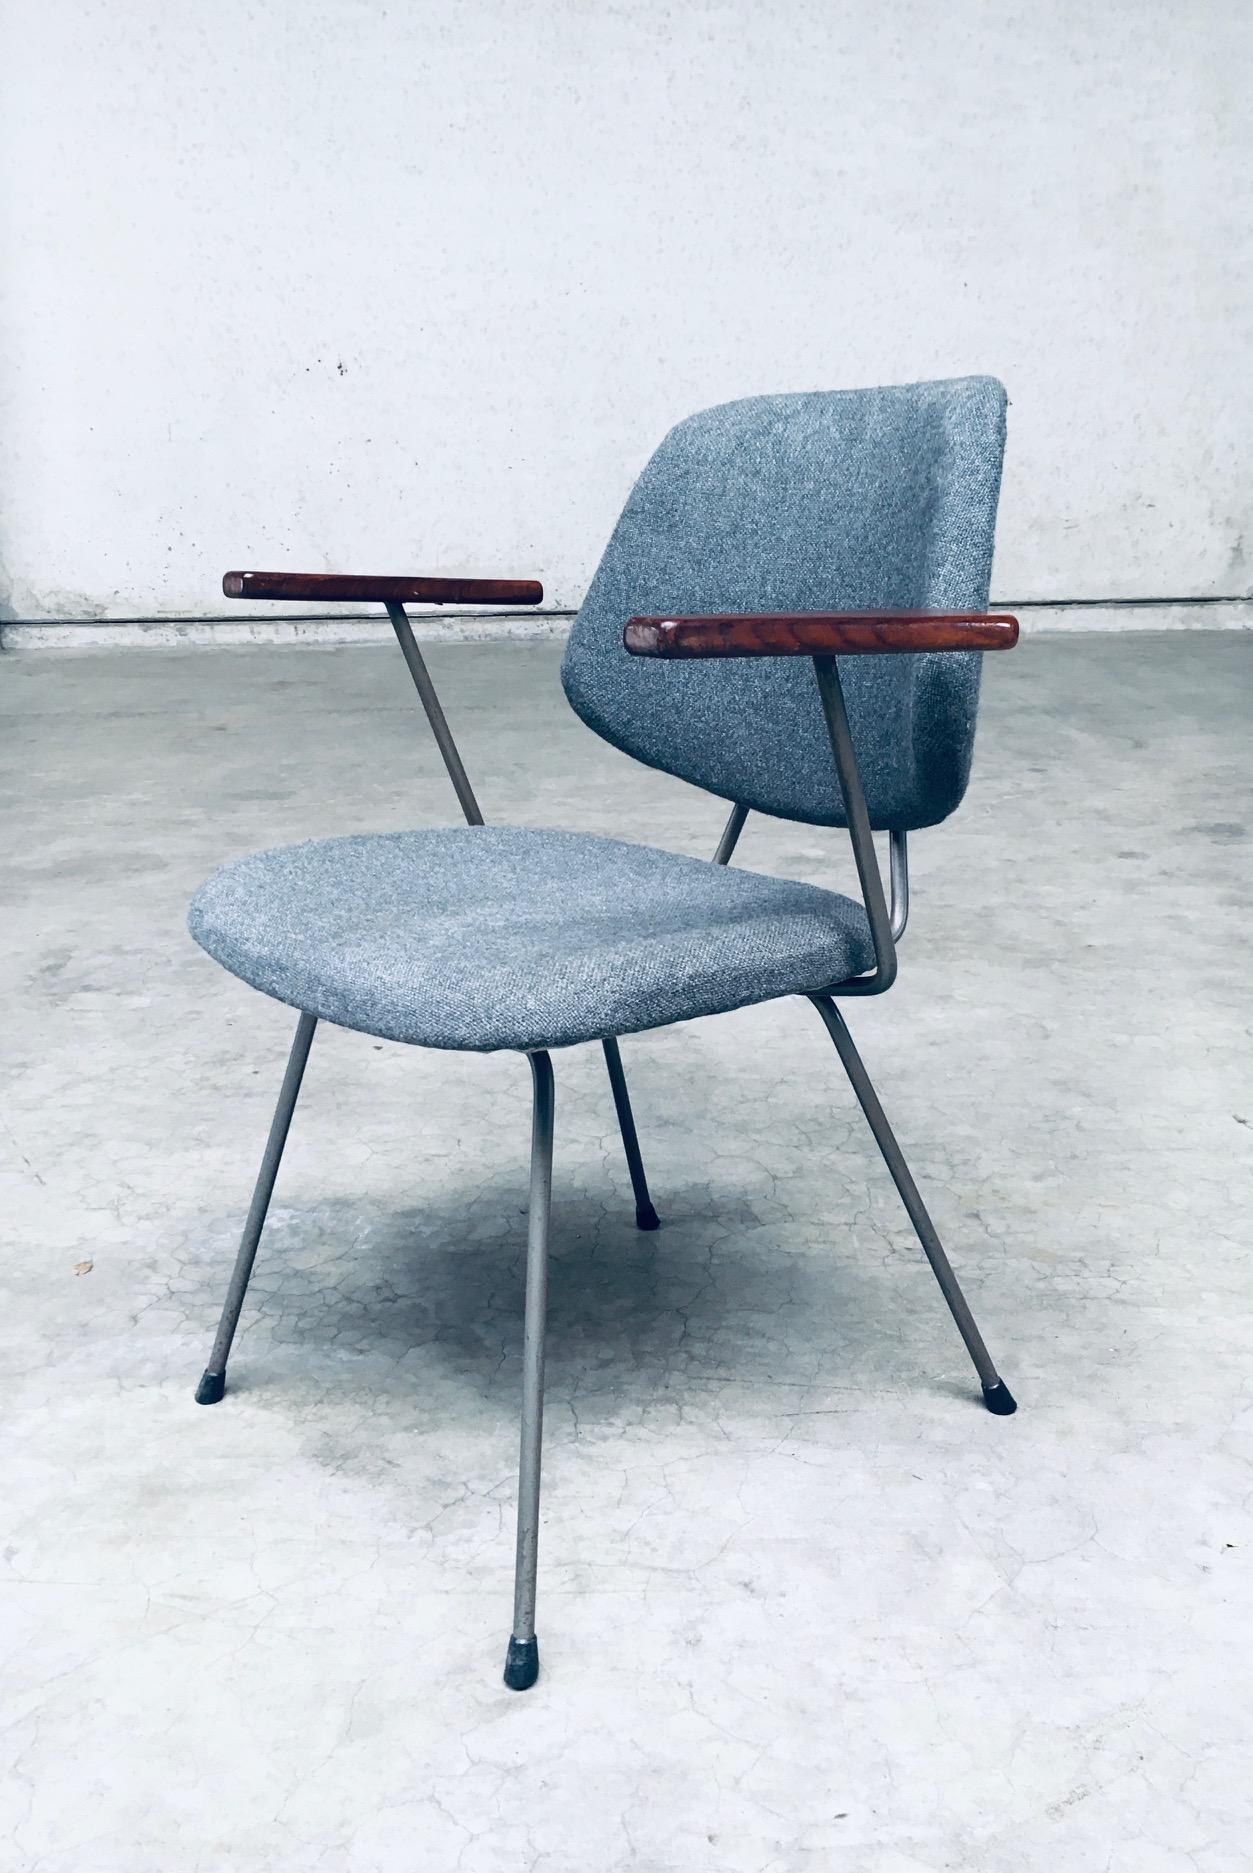 Midcentury Modern Design Office Chair set by Wim Rietveld for Kembo, 1950's For Sale 2